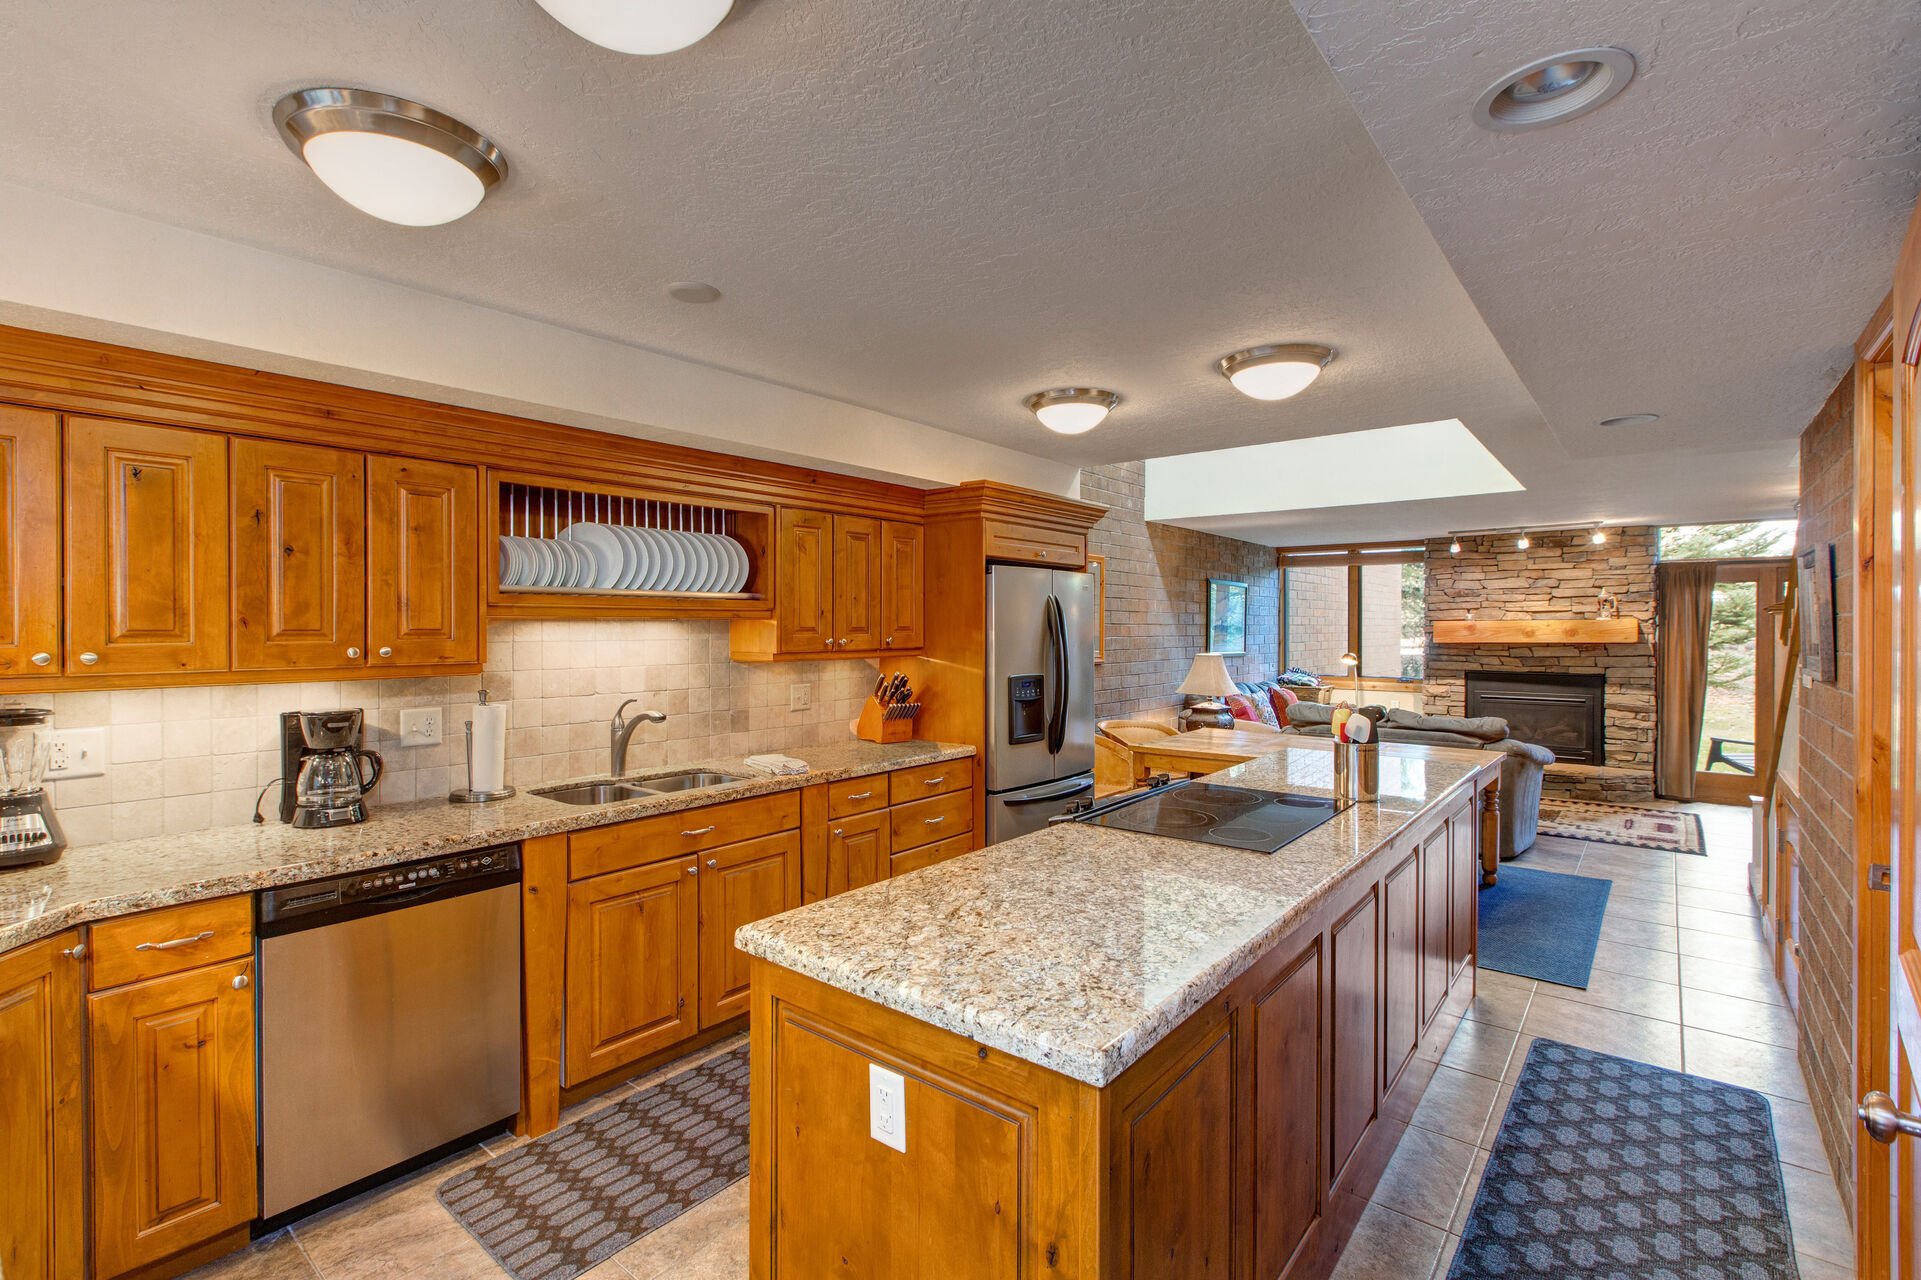 Fully Equipped Kitchen with Plenty of Counter Space - Great for Meal Prep and Entertaining